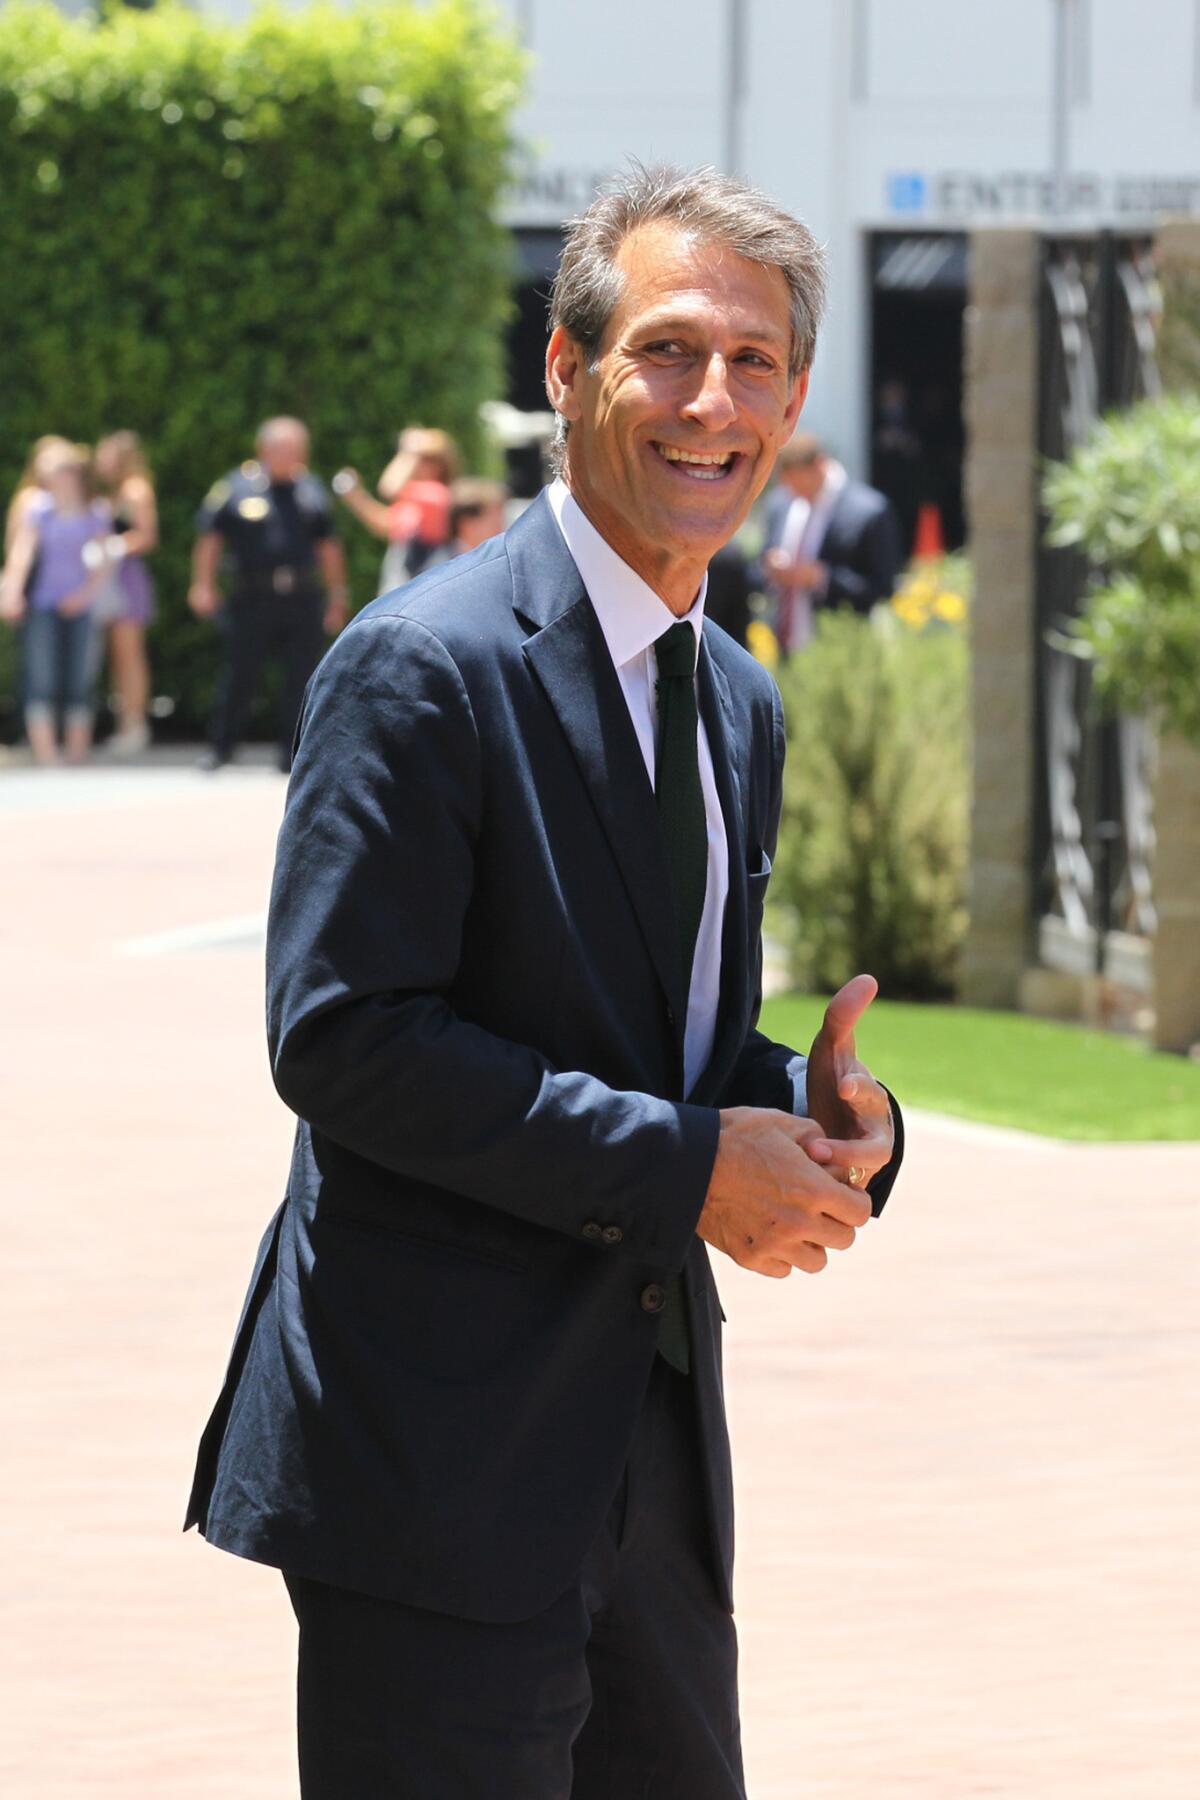 Michael Lynton has renewed his contract as chief executive of Sony Entertainment Inc.